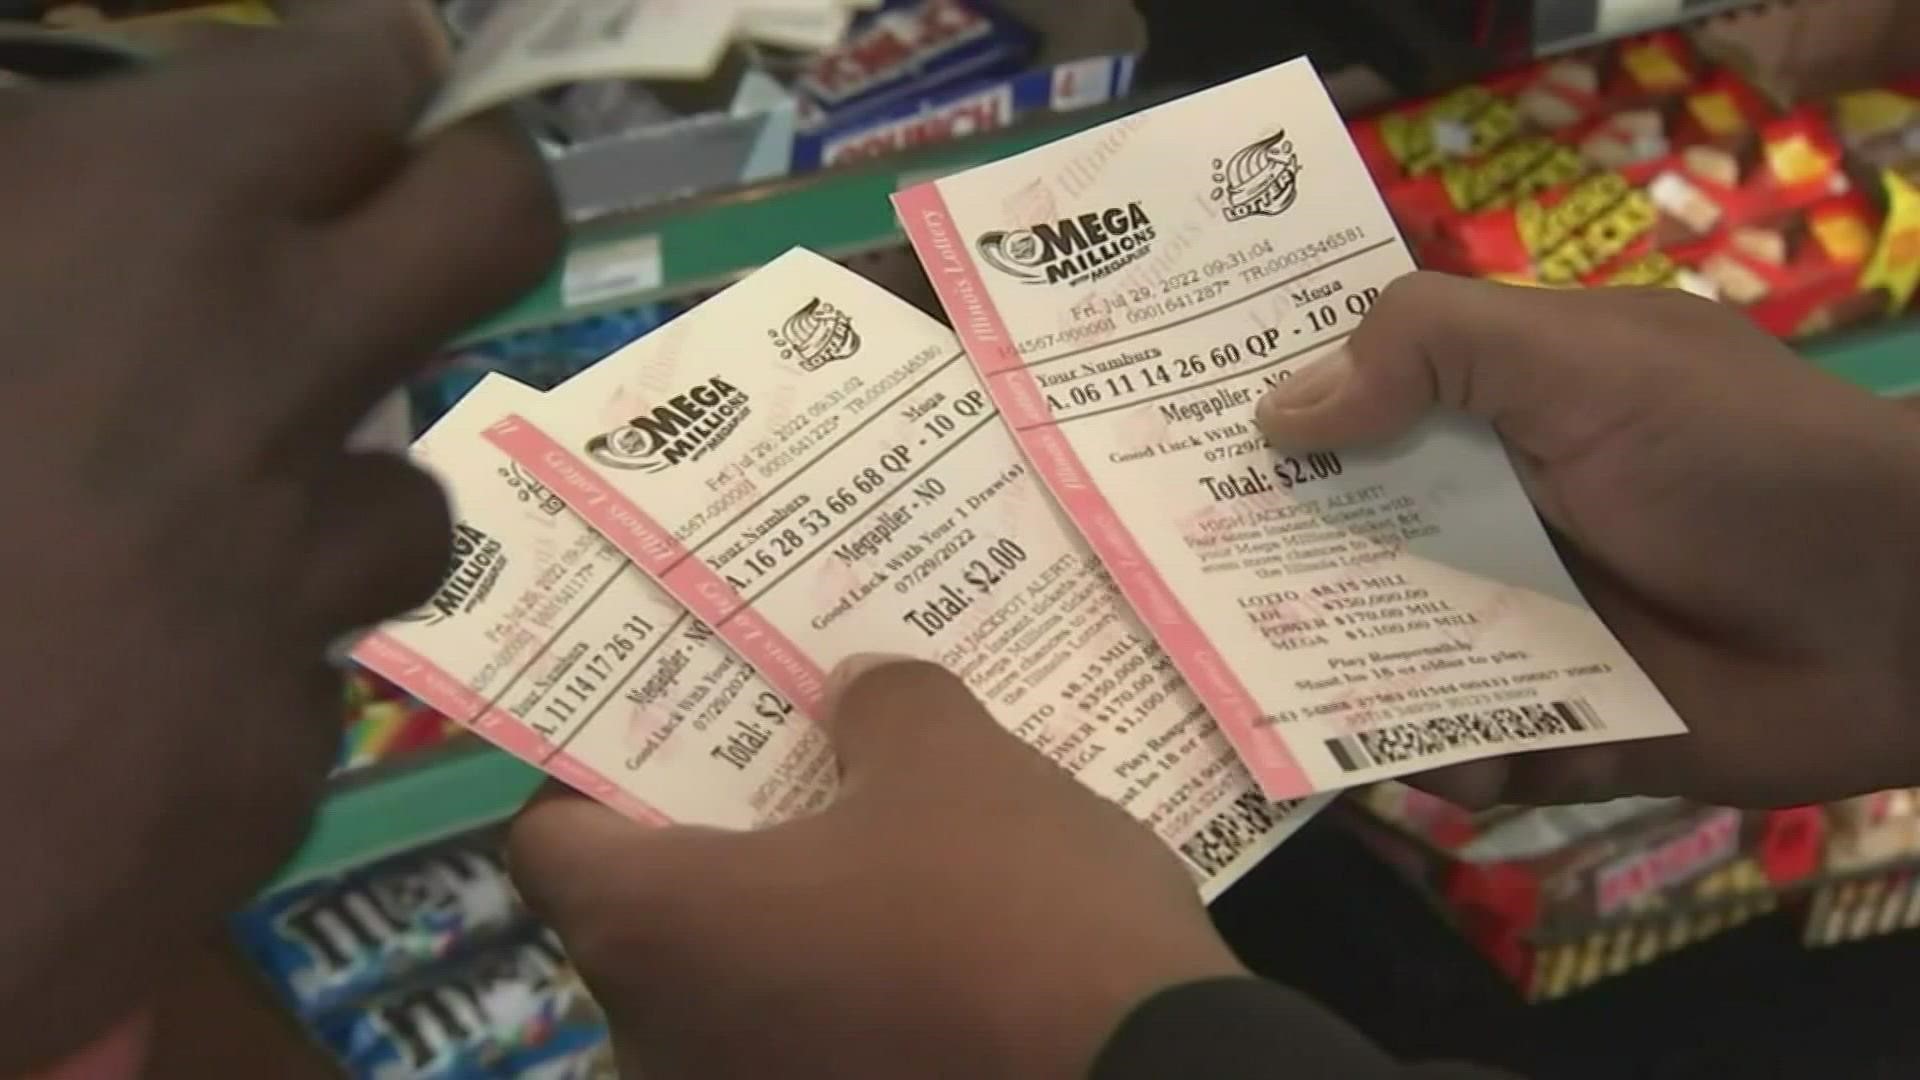 Deputy Director of the Colorado Lottery Jennifer Anderson discusses why giant lottery jackpots have become more common in recent years.